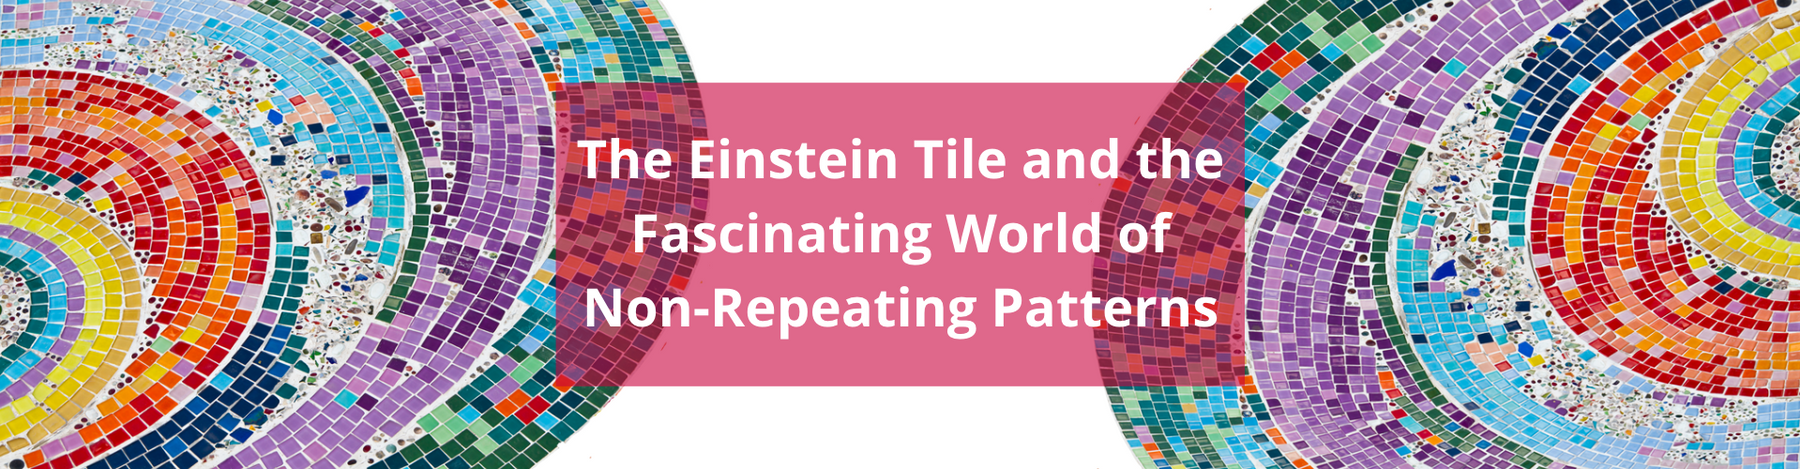 The Einstein Tile and the Fascinating World of Non-Repeating Patterns